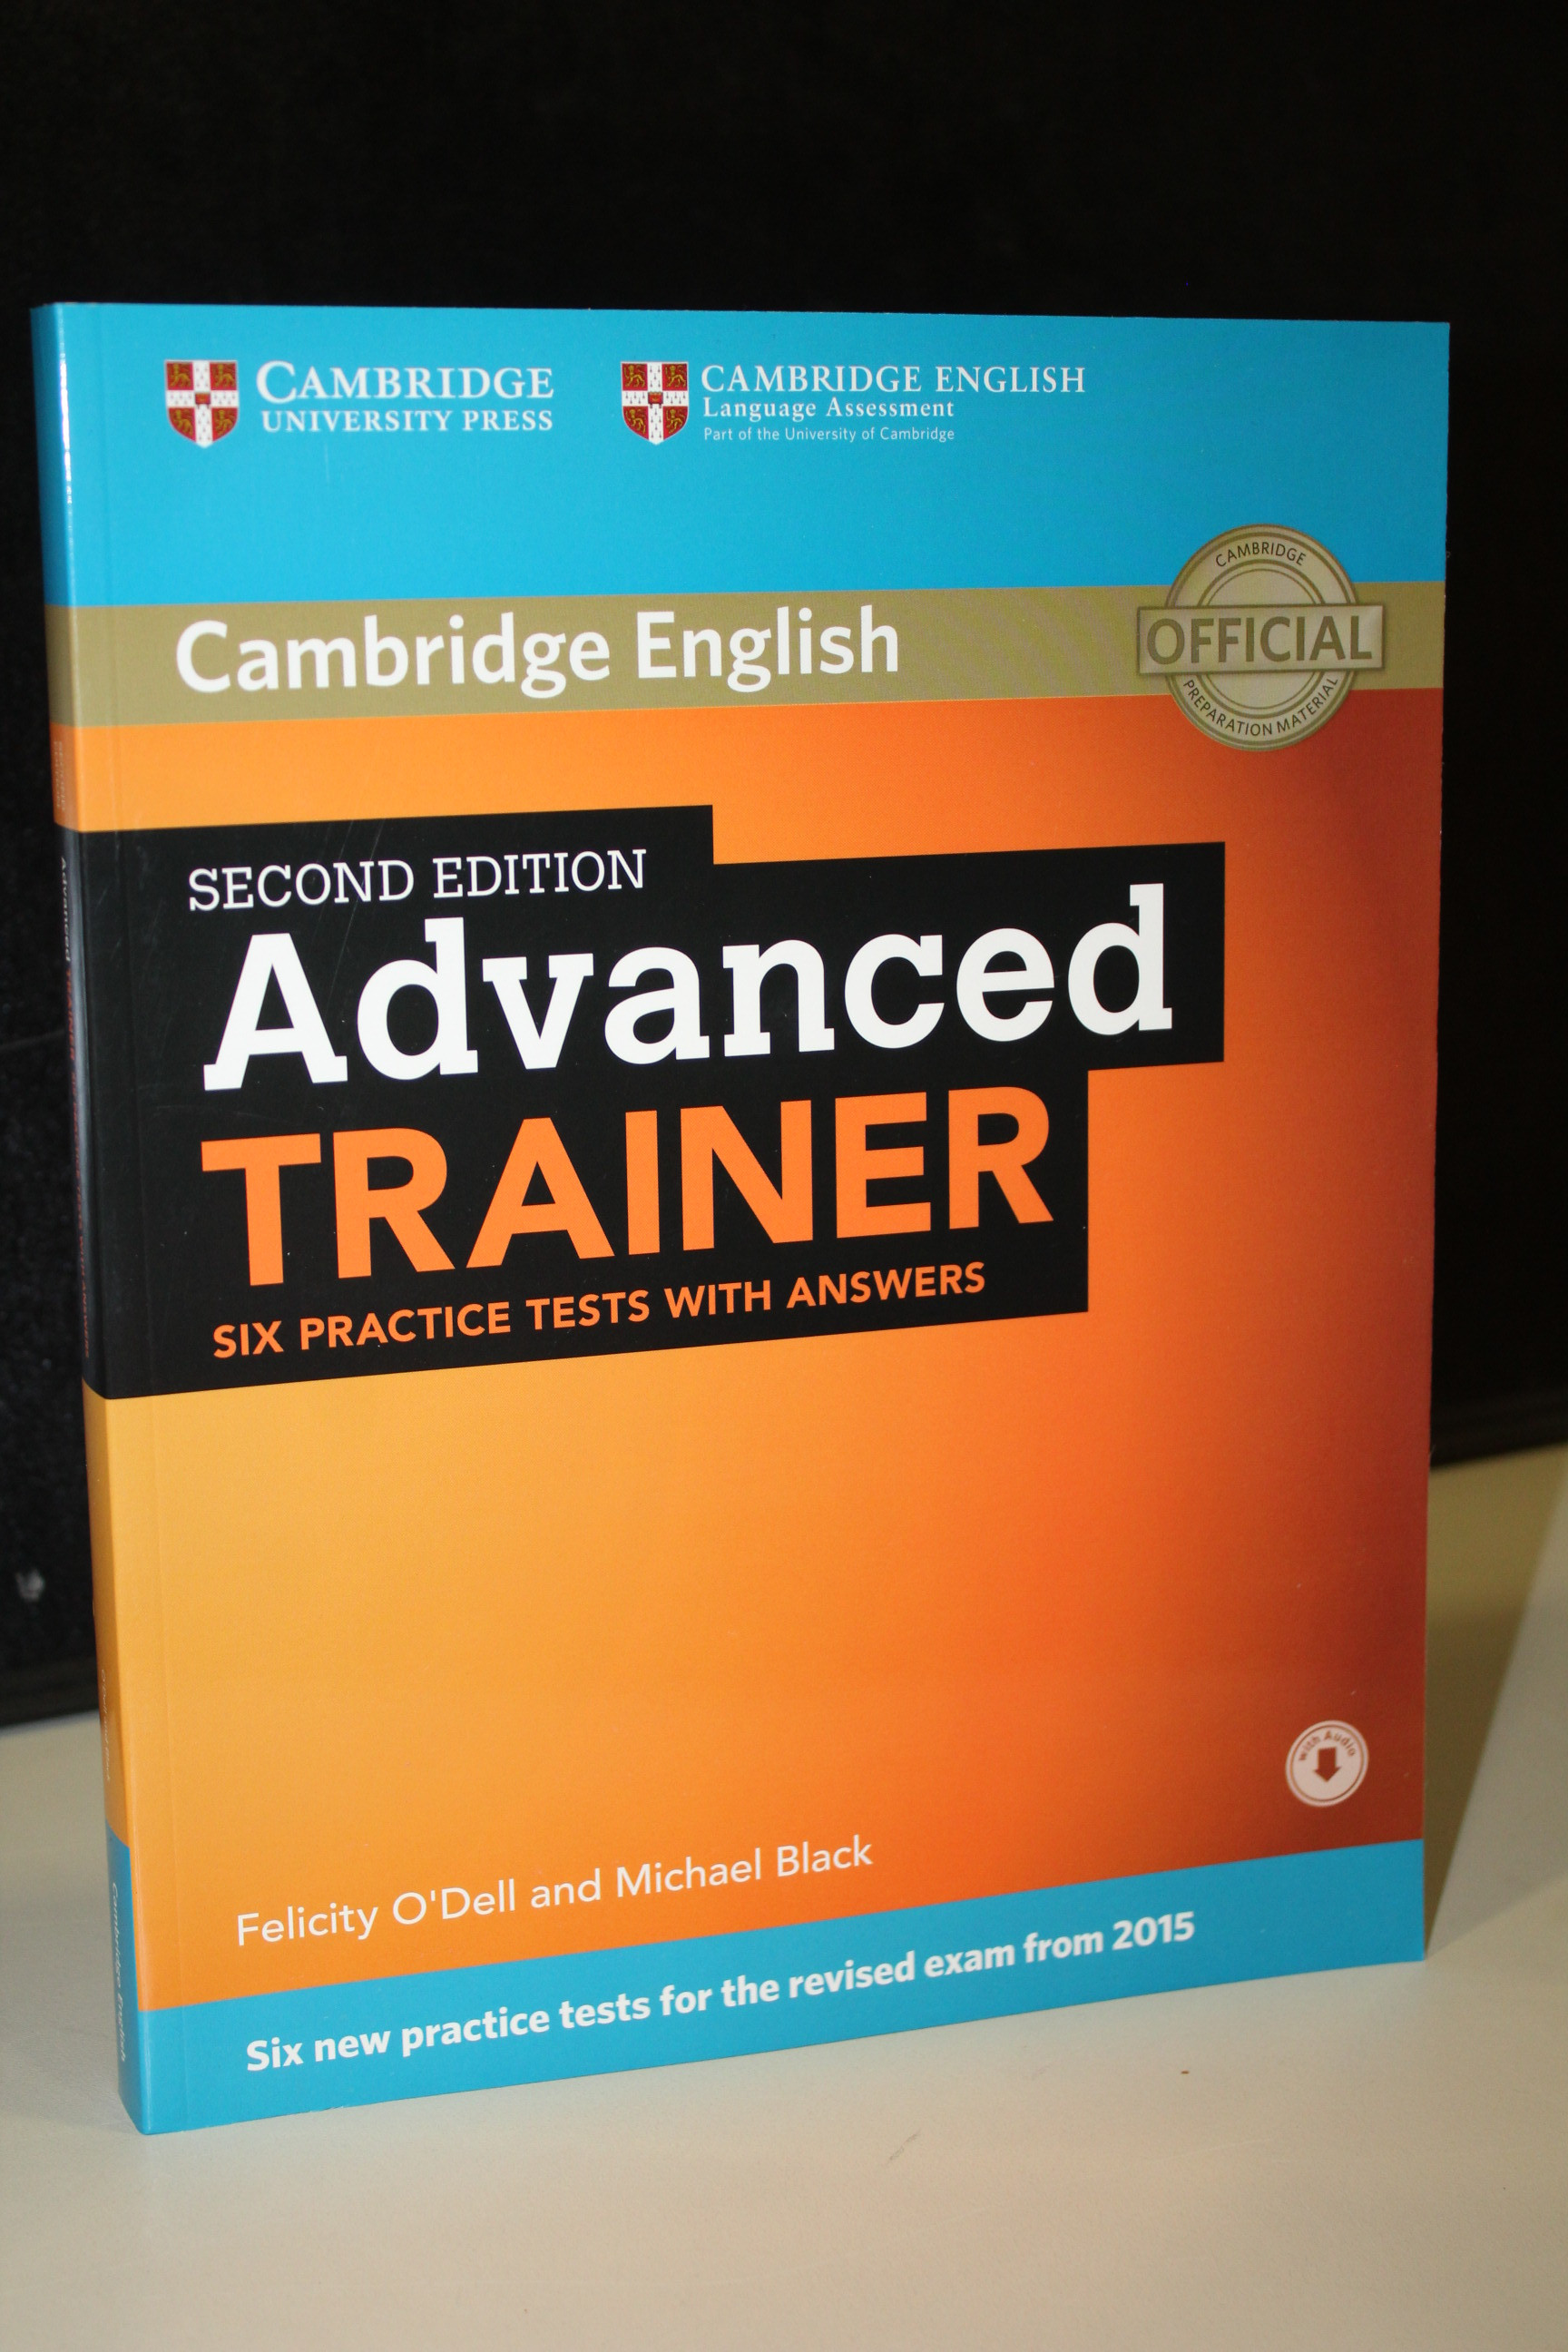 Advanced Trainer. Six practice tests with answers. Cambridge English